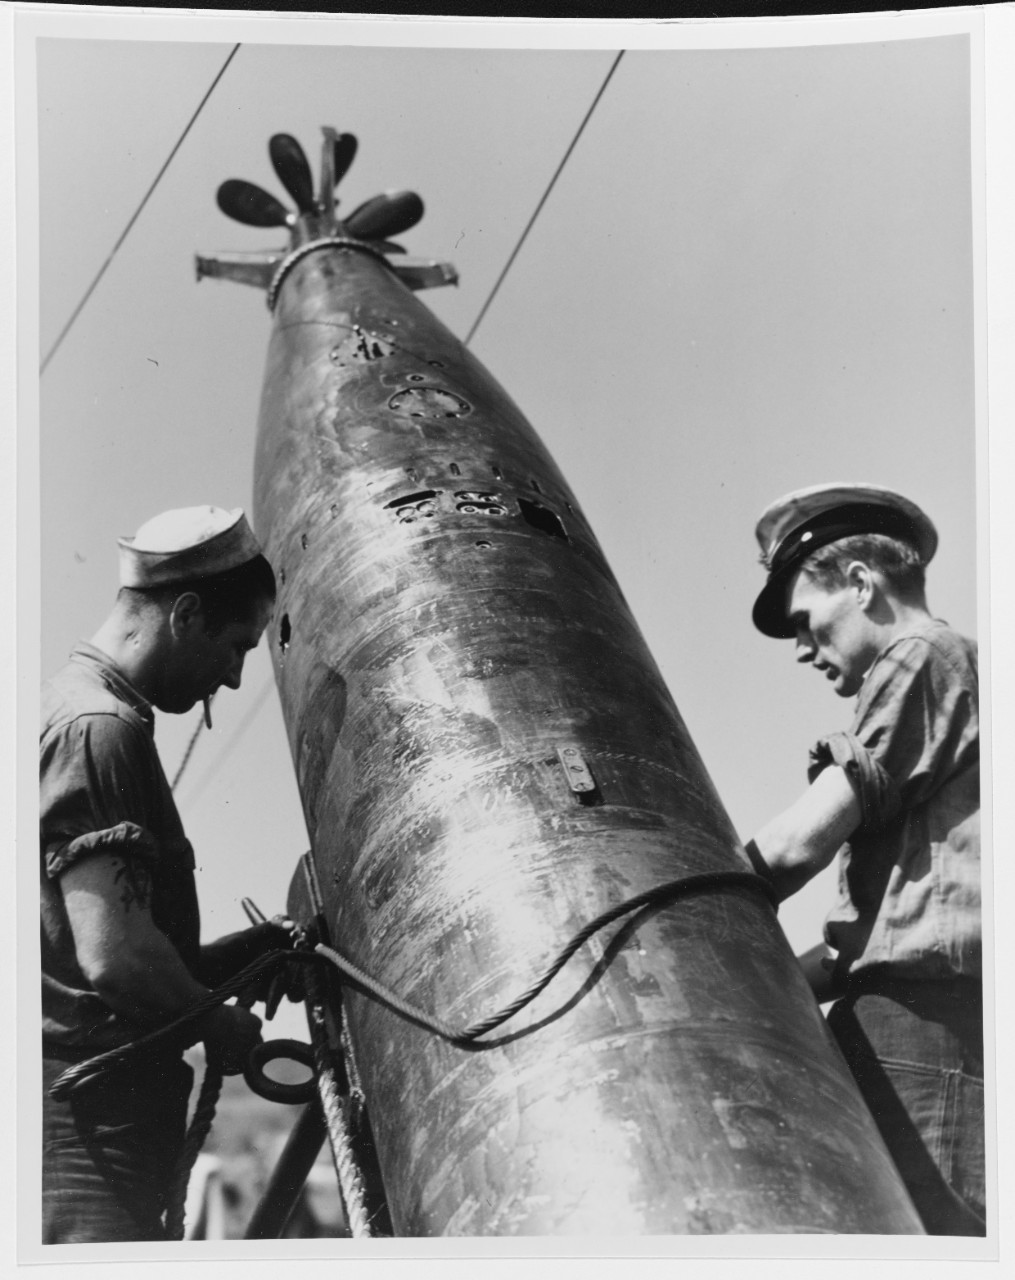 Loading Torpedoes on a Submarine